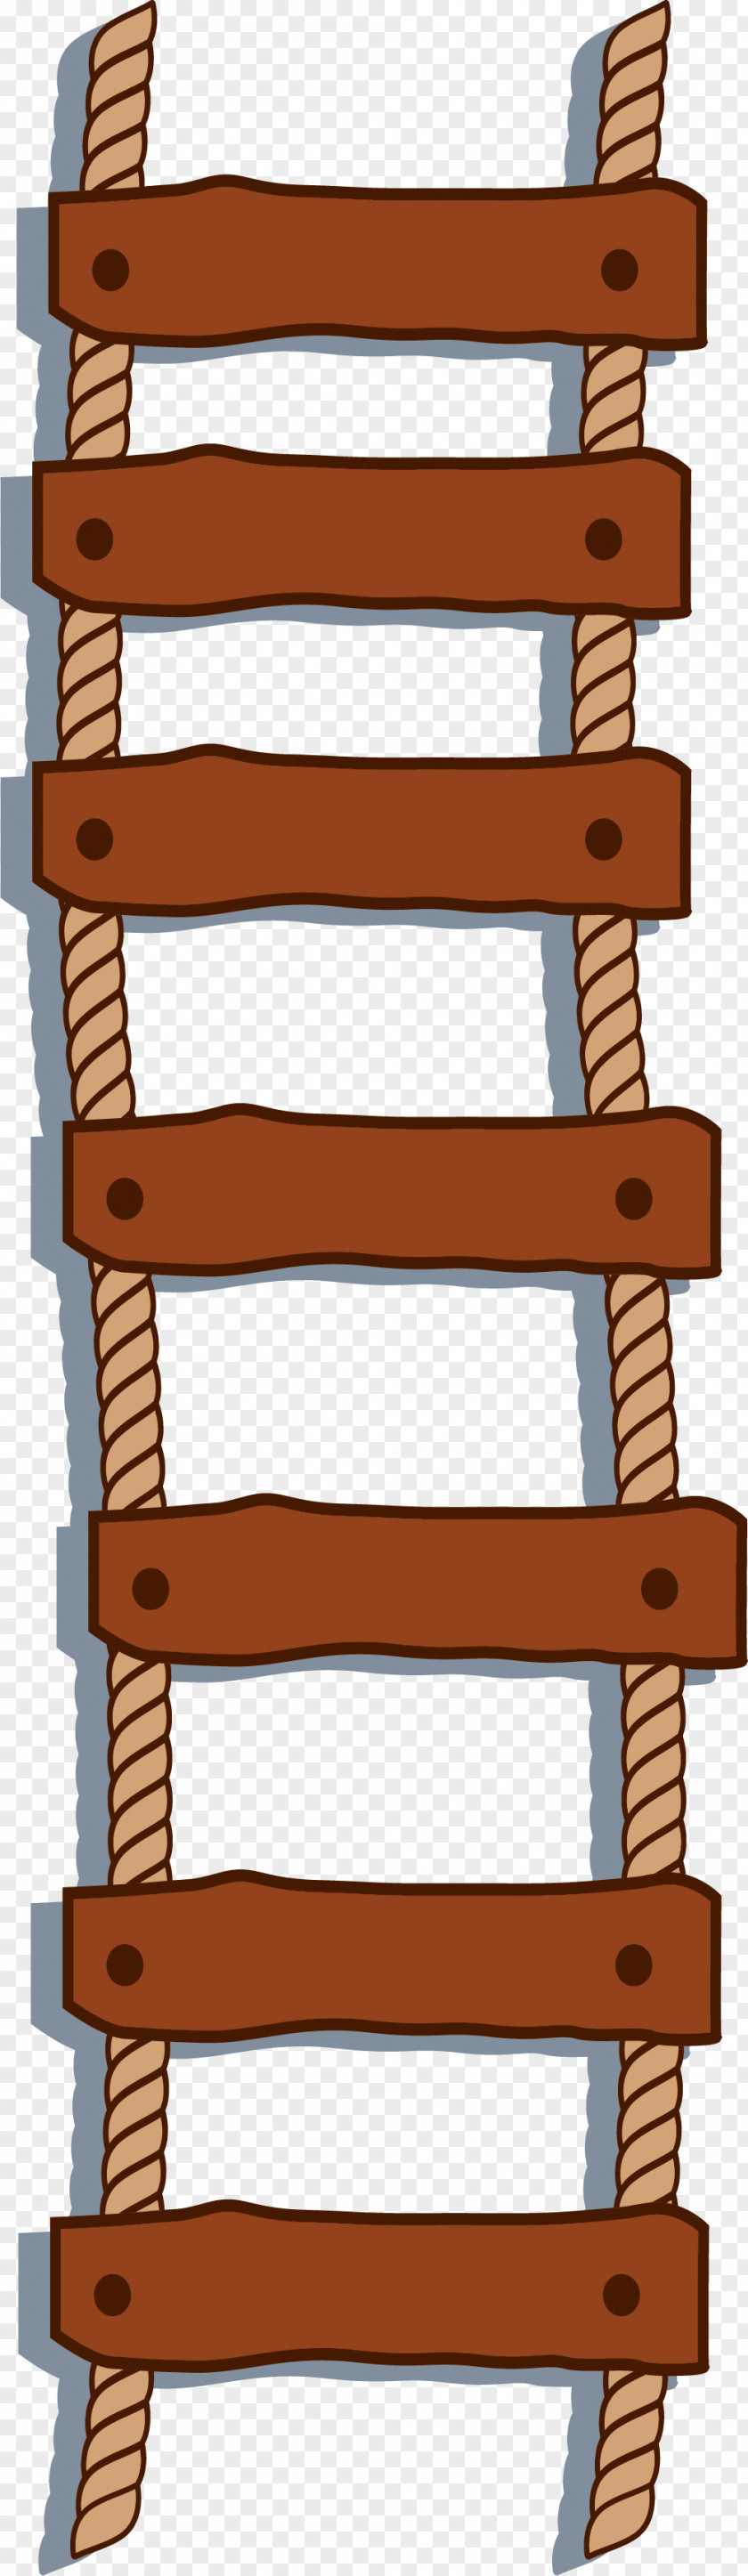 Fixed Ladder Stairs Repstege PNG